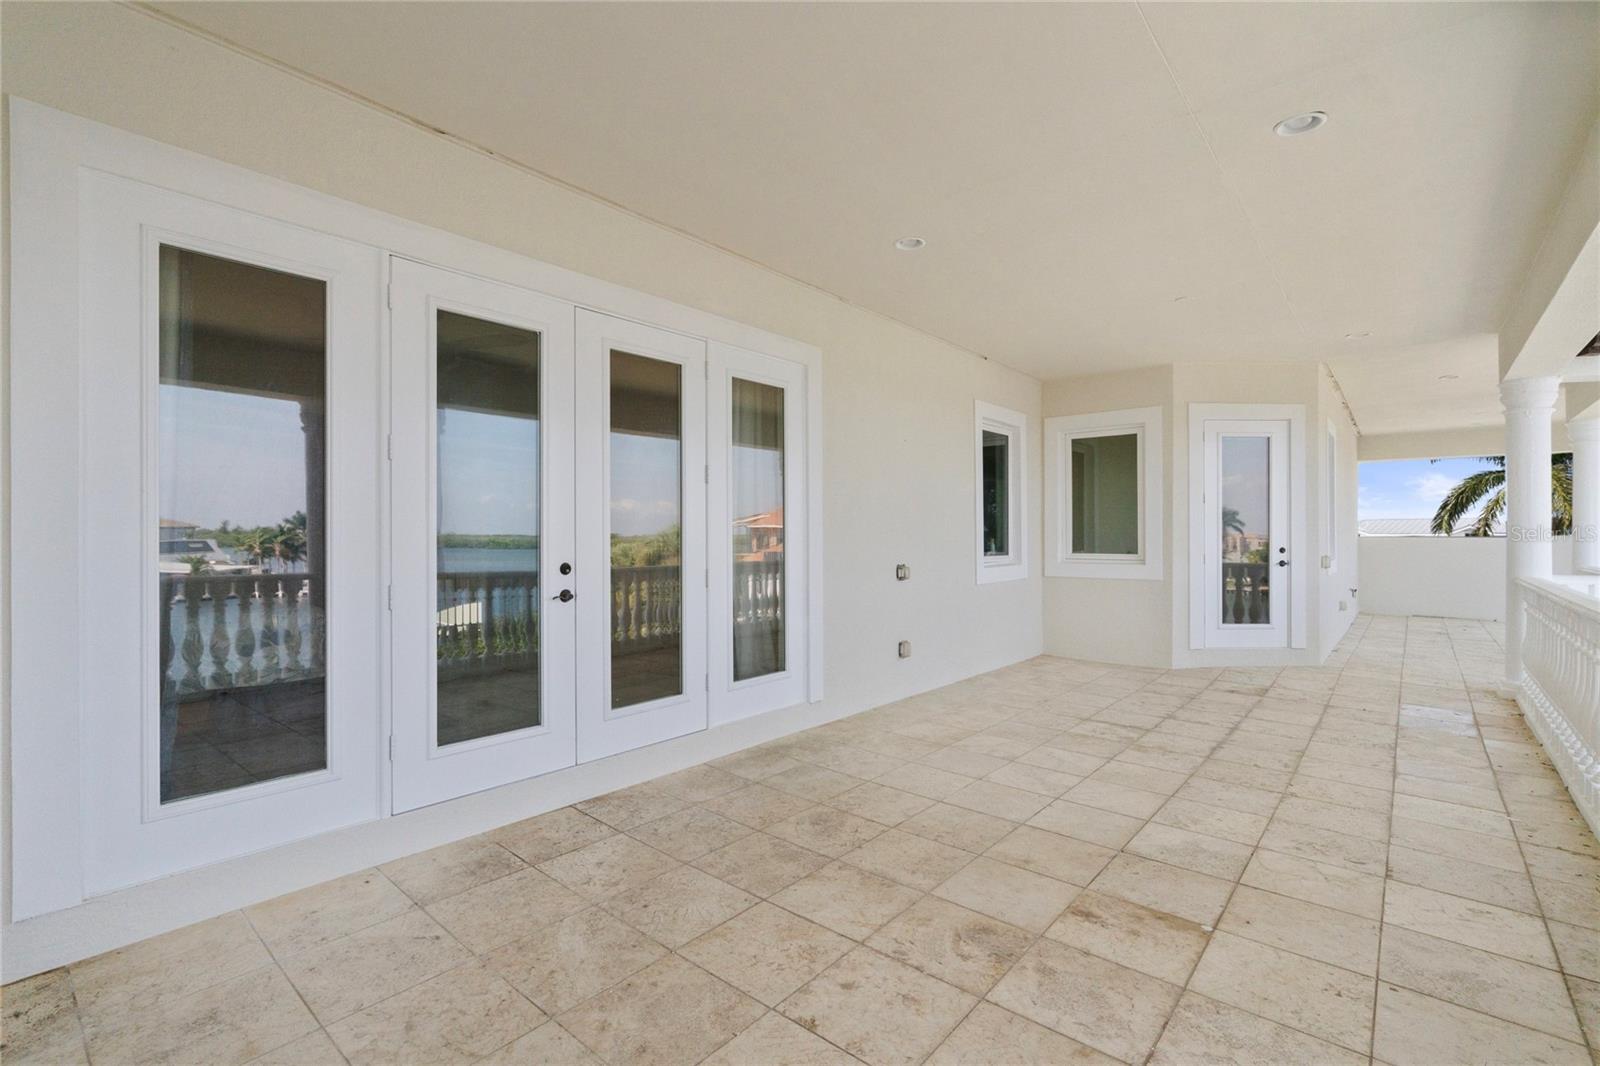 Huge covered balcony with views of Tampa Bay